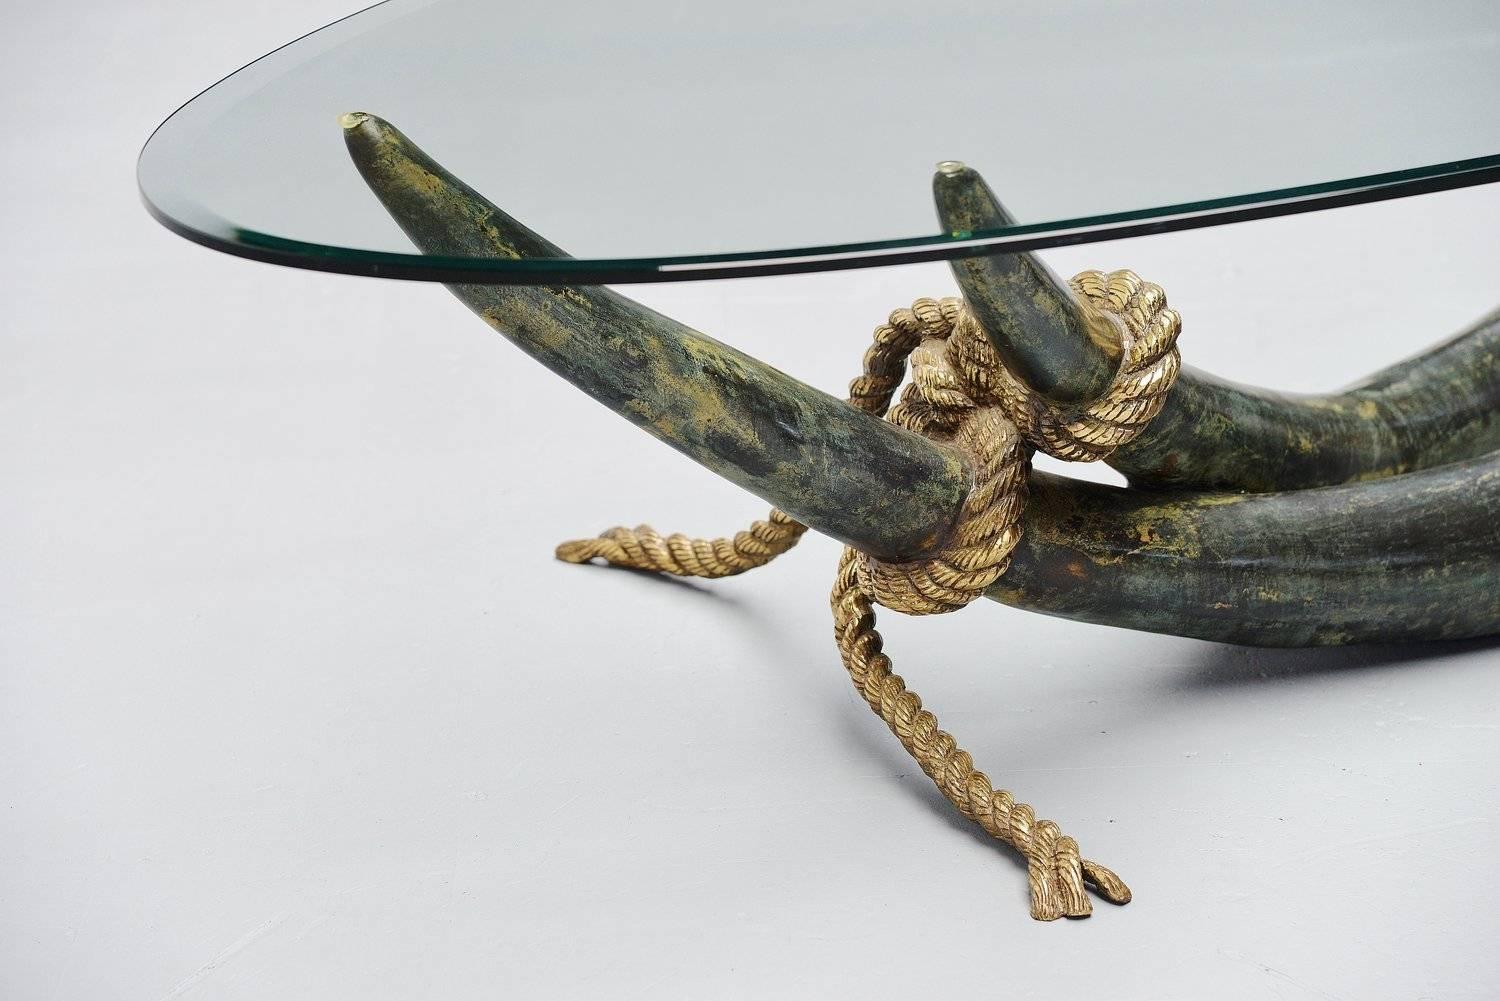 Fantastic and large coffee table designed by Italy Valenti for Valenti, Spain, 1975. This table is made of solid bronze, partly patinated in greenish finish. The solid bronze rope is stabilizing the ensemble. The oval glass tabletop is made from